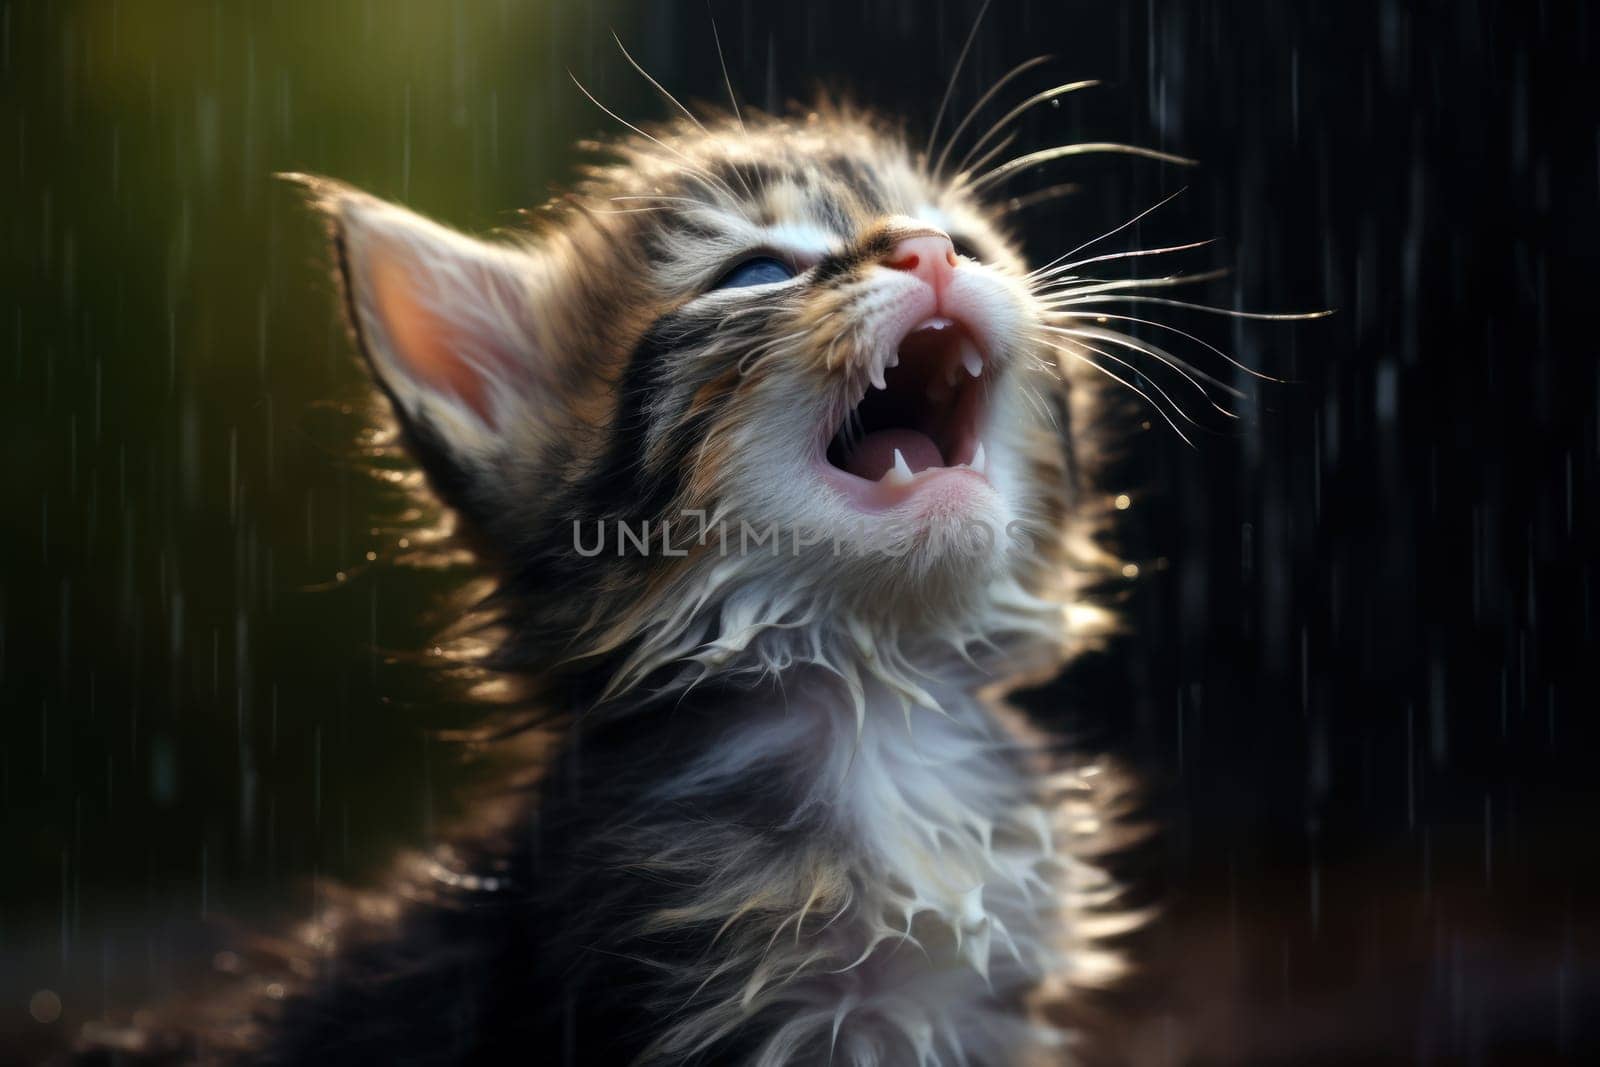 A kitten with floppy ears trying to catch the raindrops with its tongue.